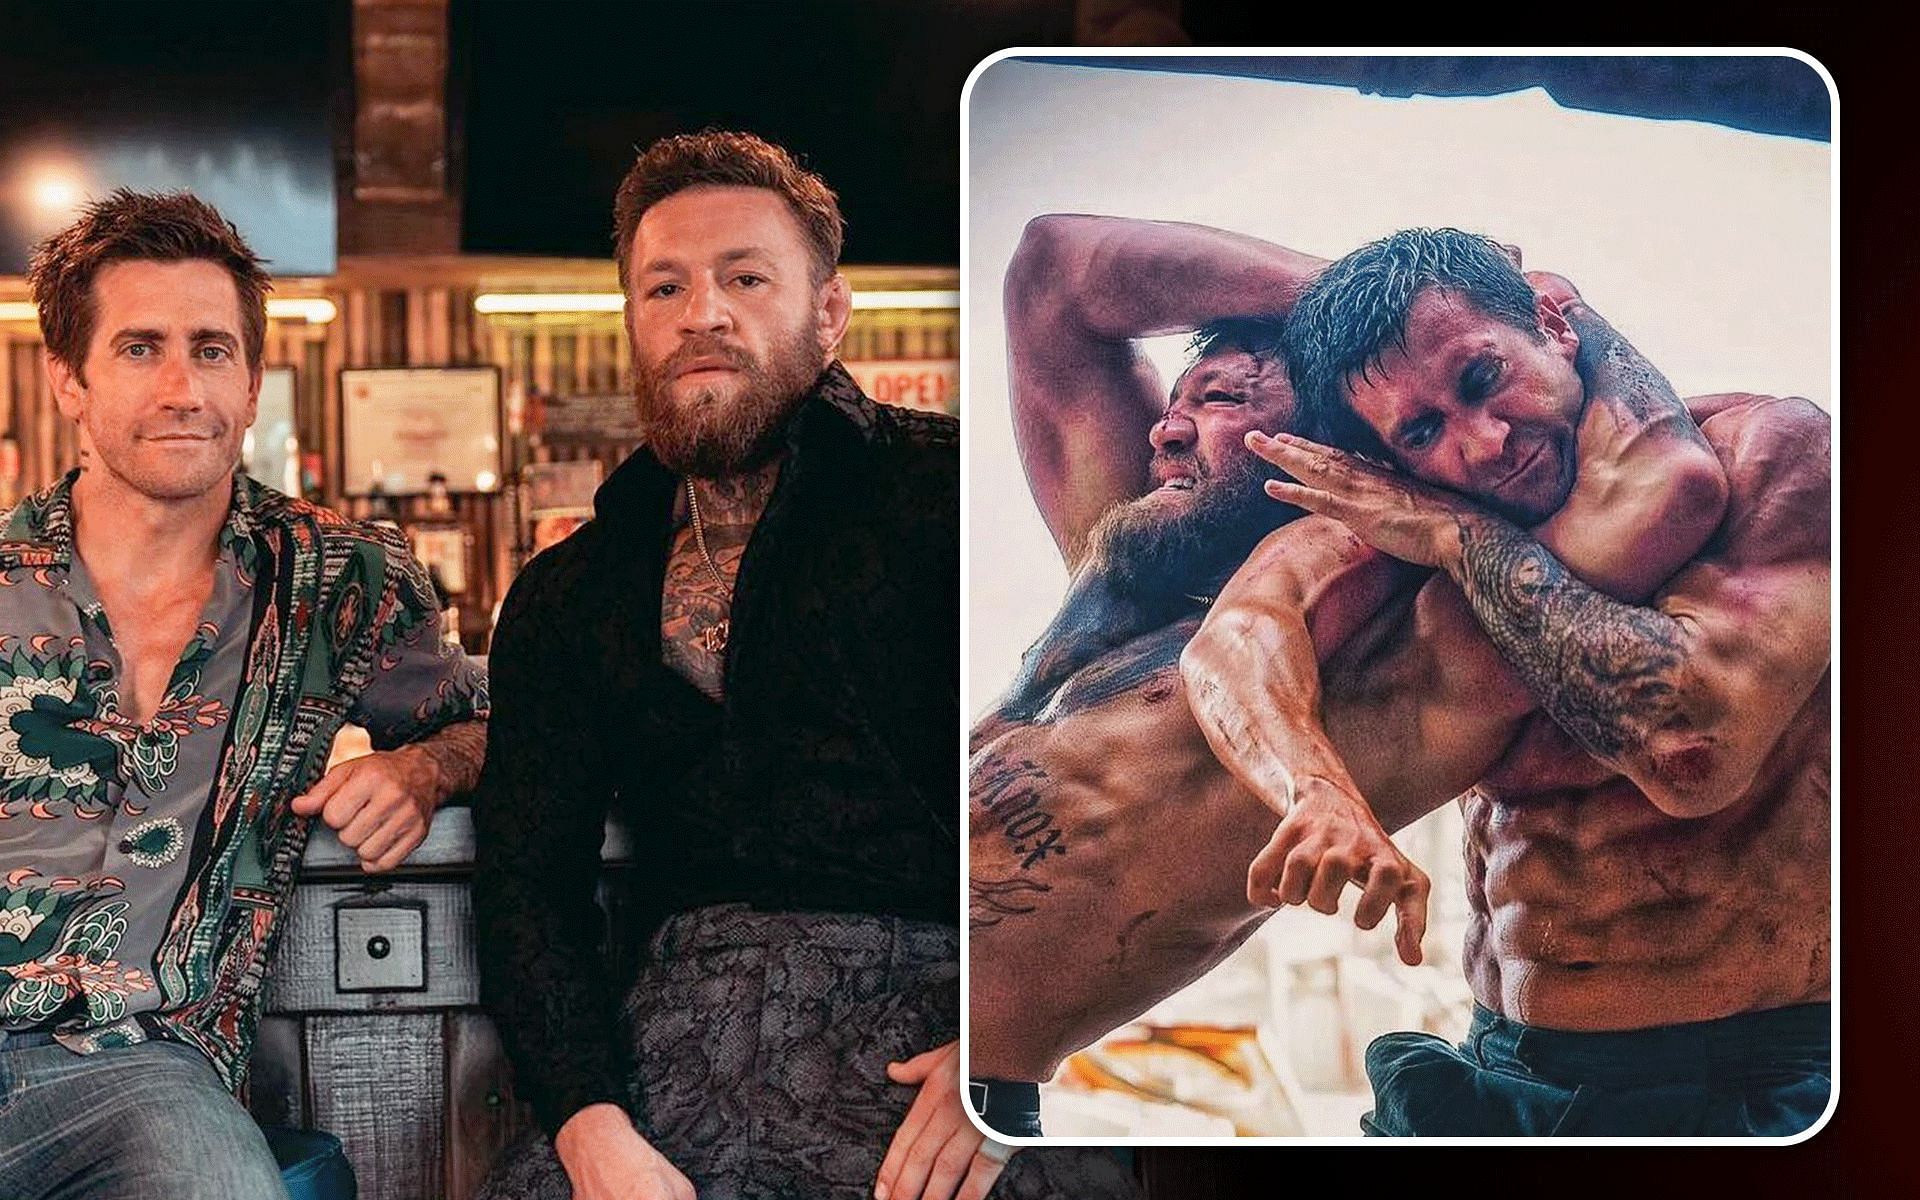 Jake Gyllenhaal opens up on working with Co-star Conor McGregor in Road House remake. [Image courtesy: @thenotoriousmma on Instagram]